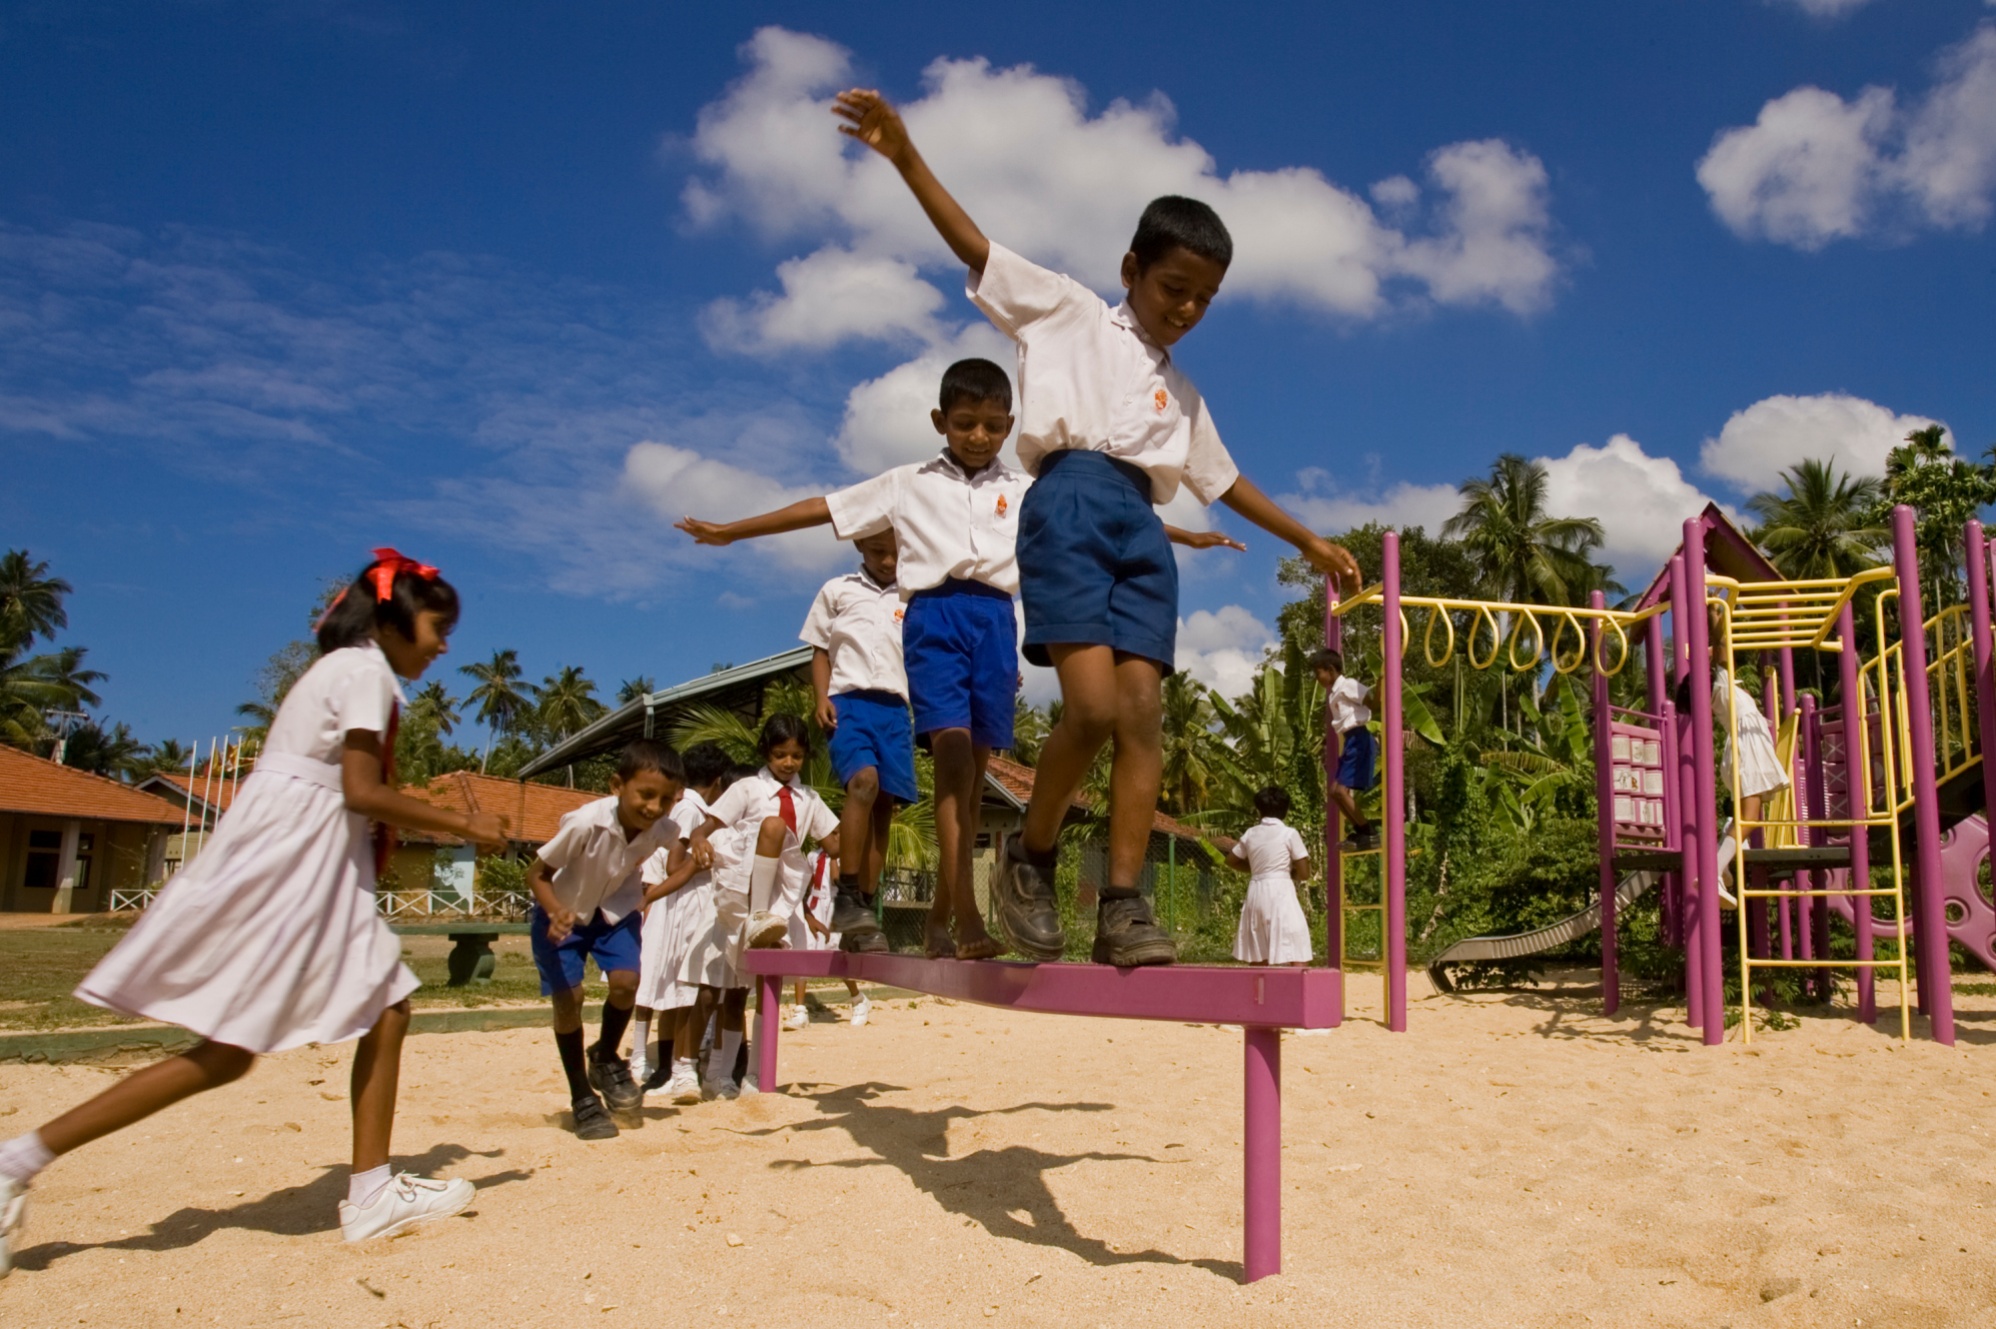 Students on the playground at Dharmarama Kanishta Vidyalaya in Ahangama, Sri Lanka. This school was rebuilt through the Schools Reawaken project after the 2004 tsunami. District 3220 (Sri Lanka) raised funds for the project and received support from The Rotary Foundation, Standard Chartered Bank, and other contributors. A local Buddhist temple donated the land.